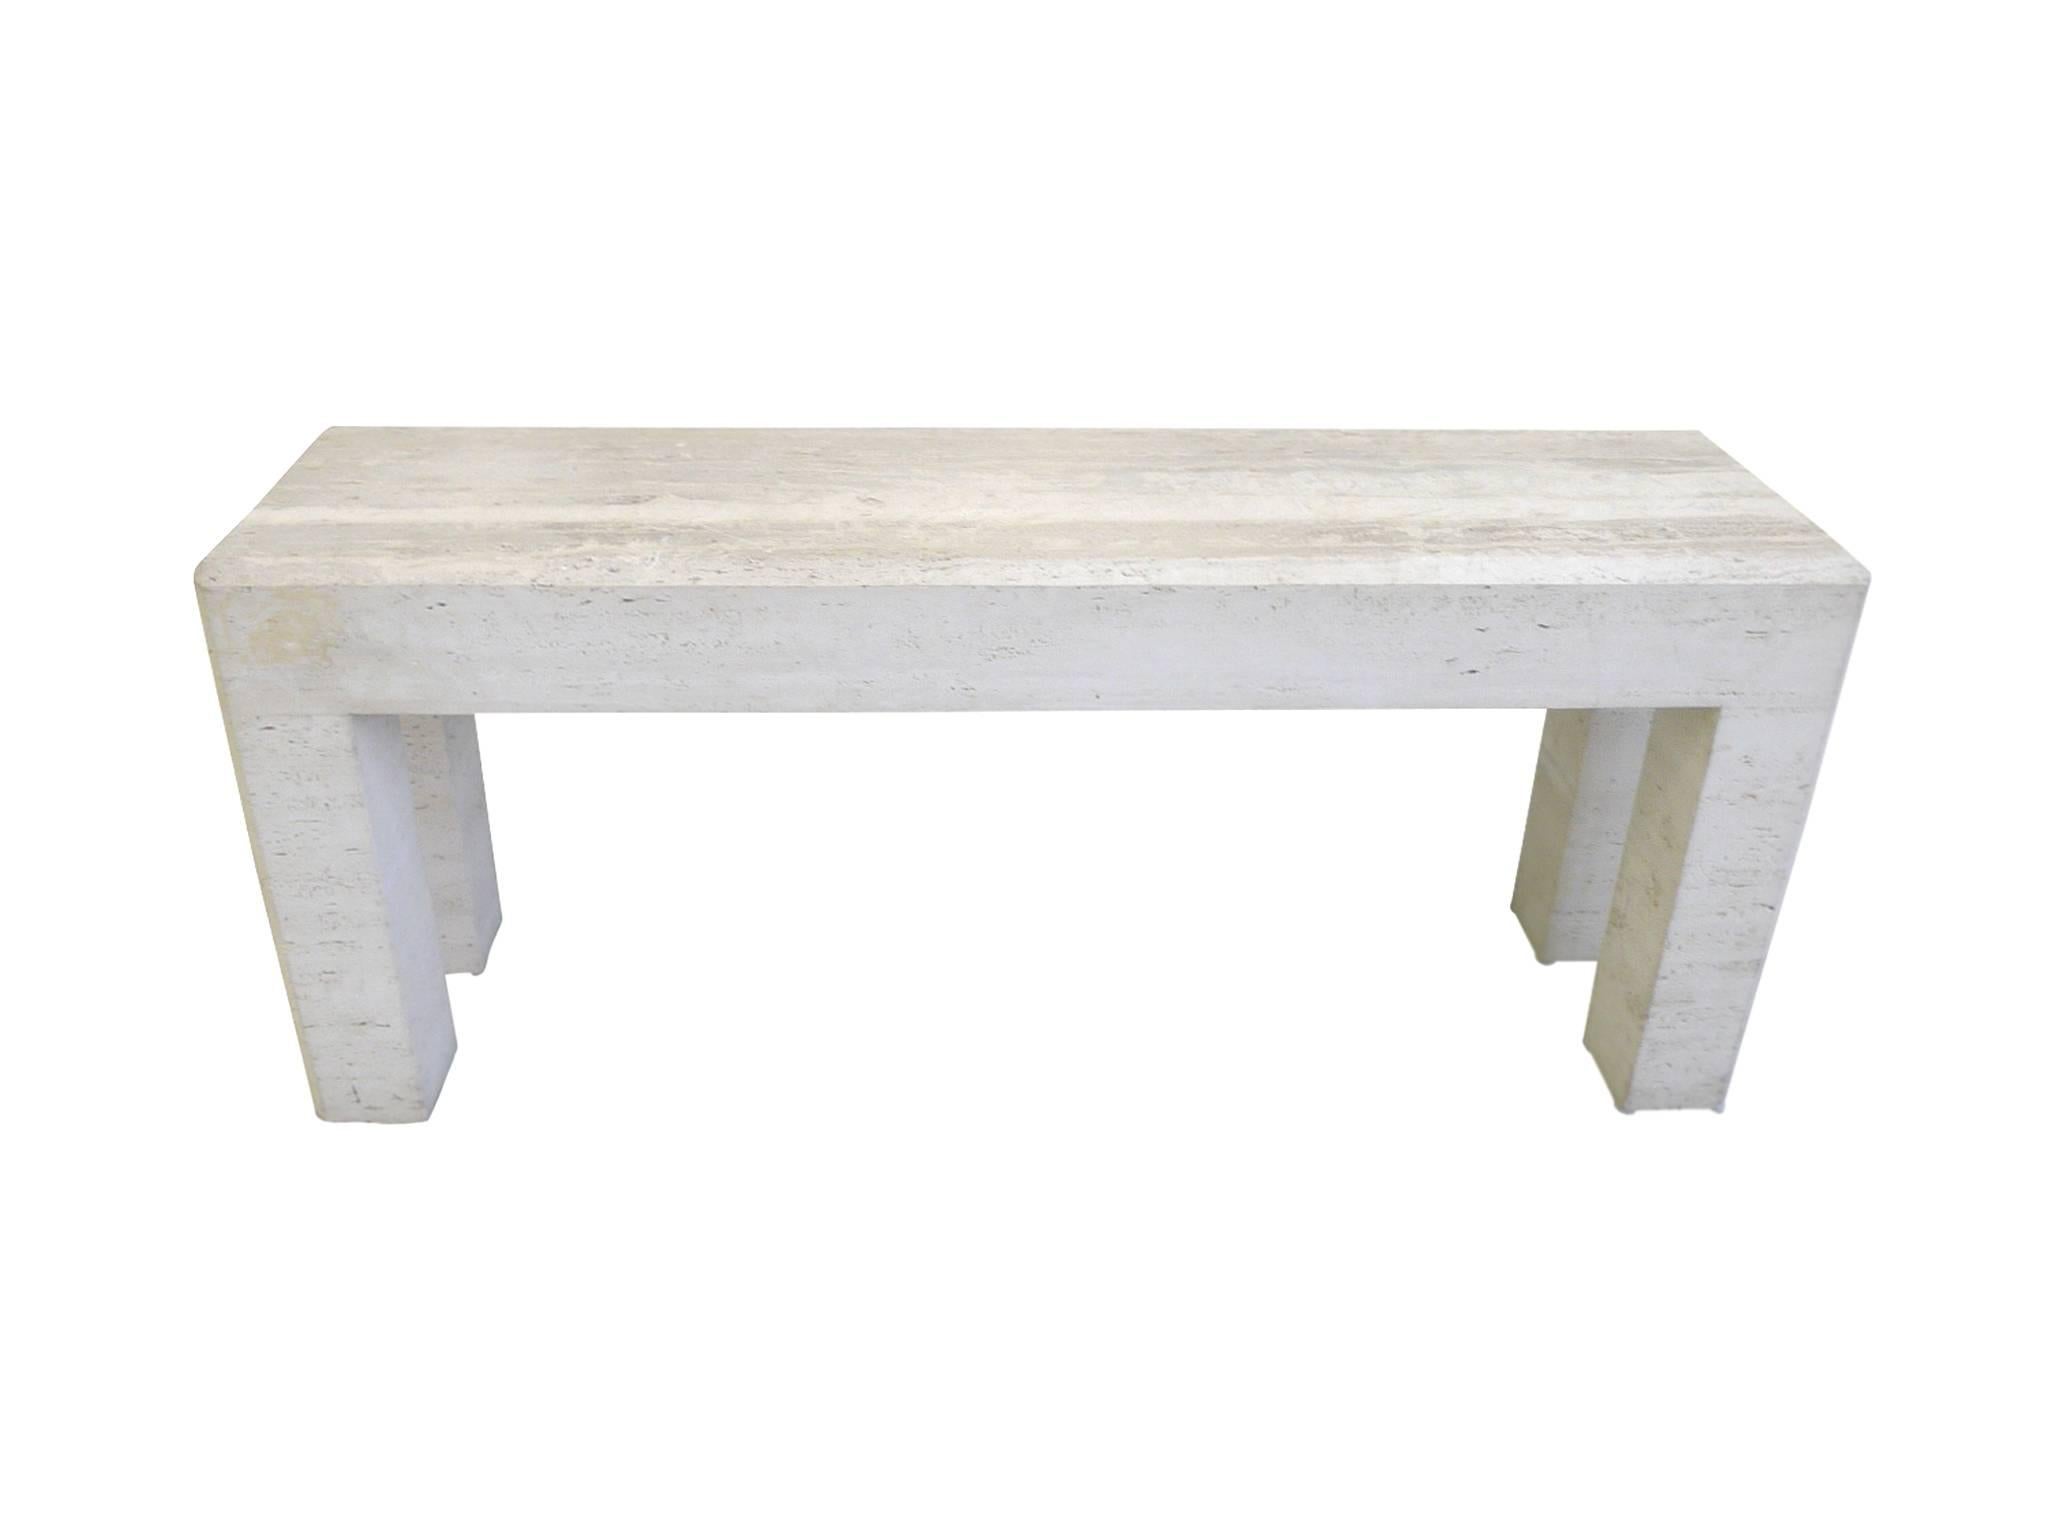 20th Century Travertine Console Sofa Table in the Manner of Maitland-Smith 1